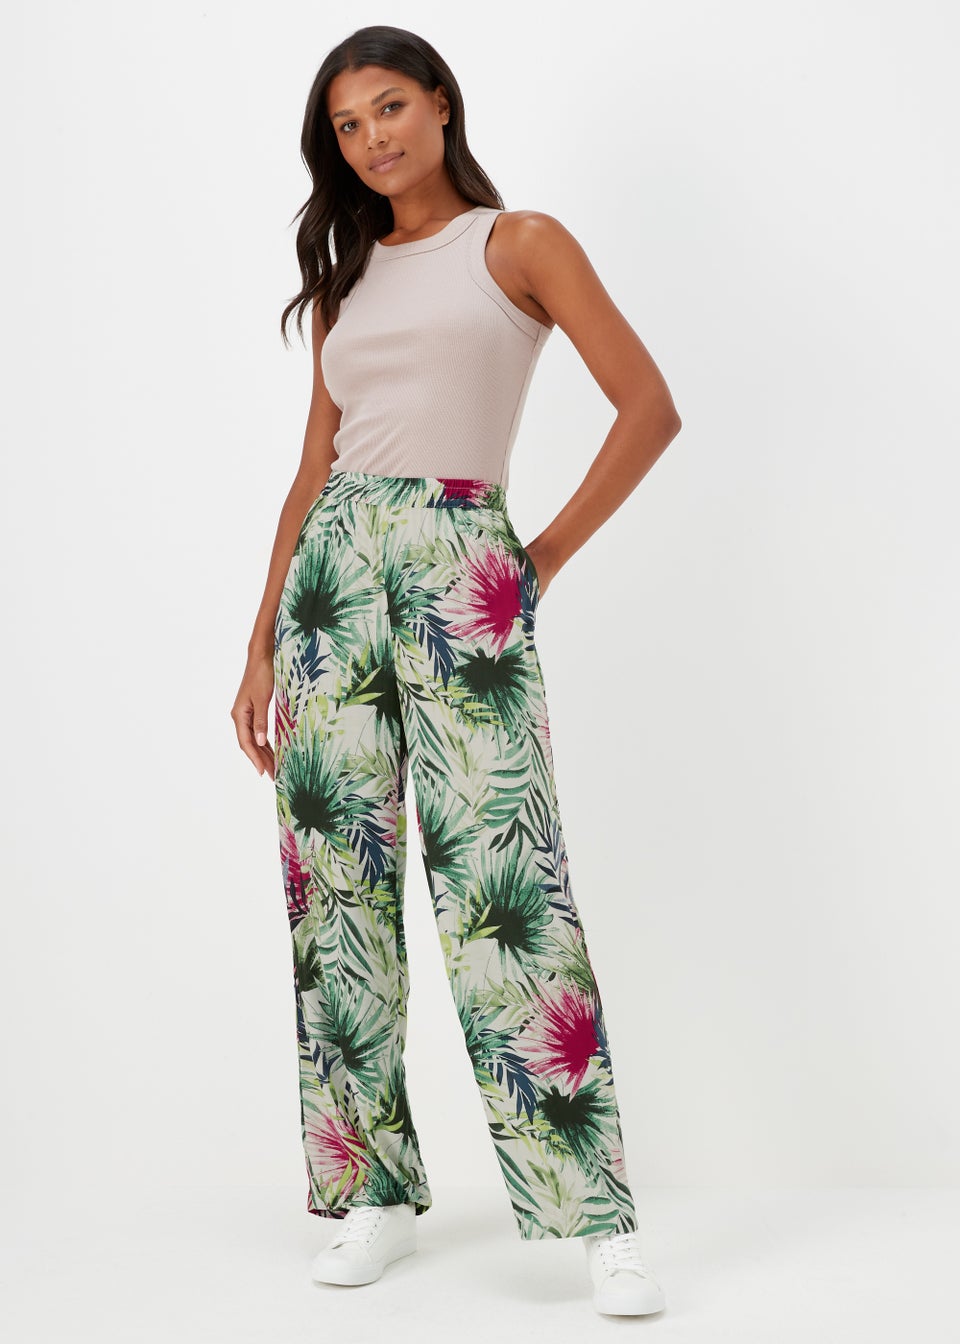 Update 119+ floral trousers best